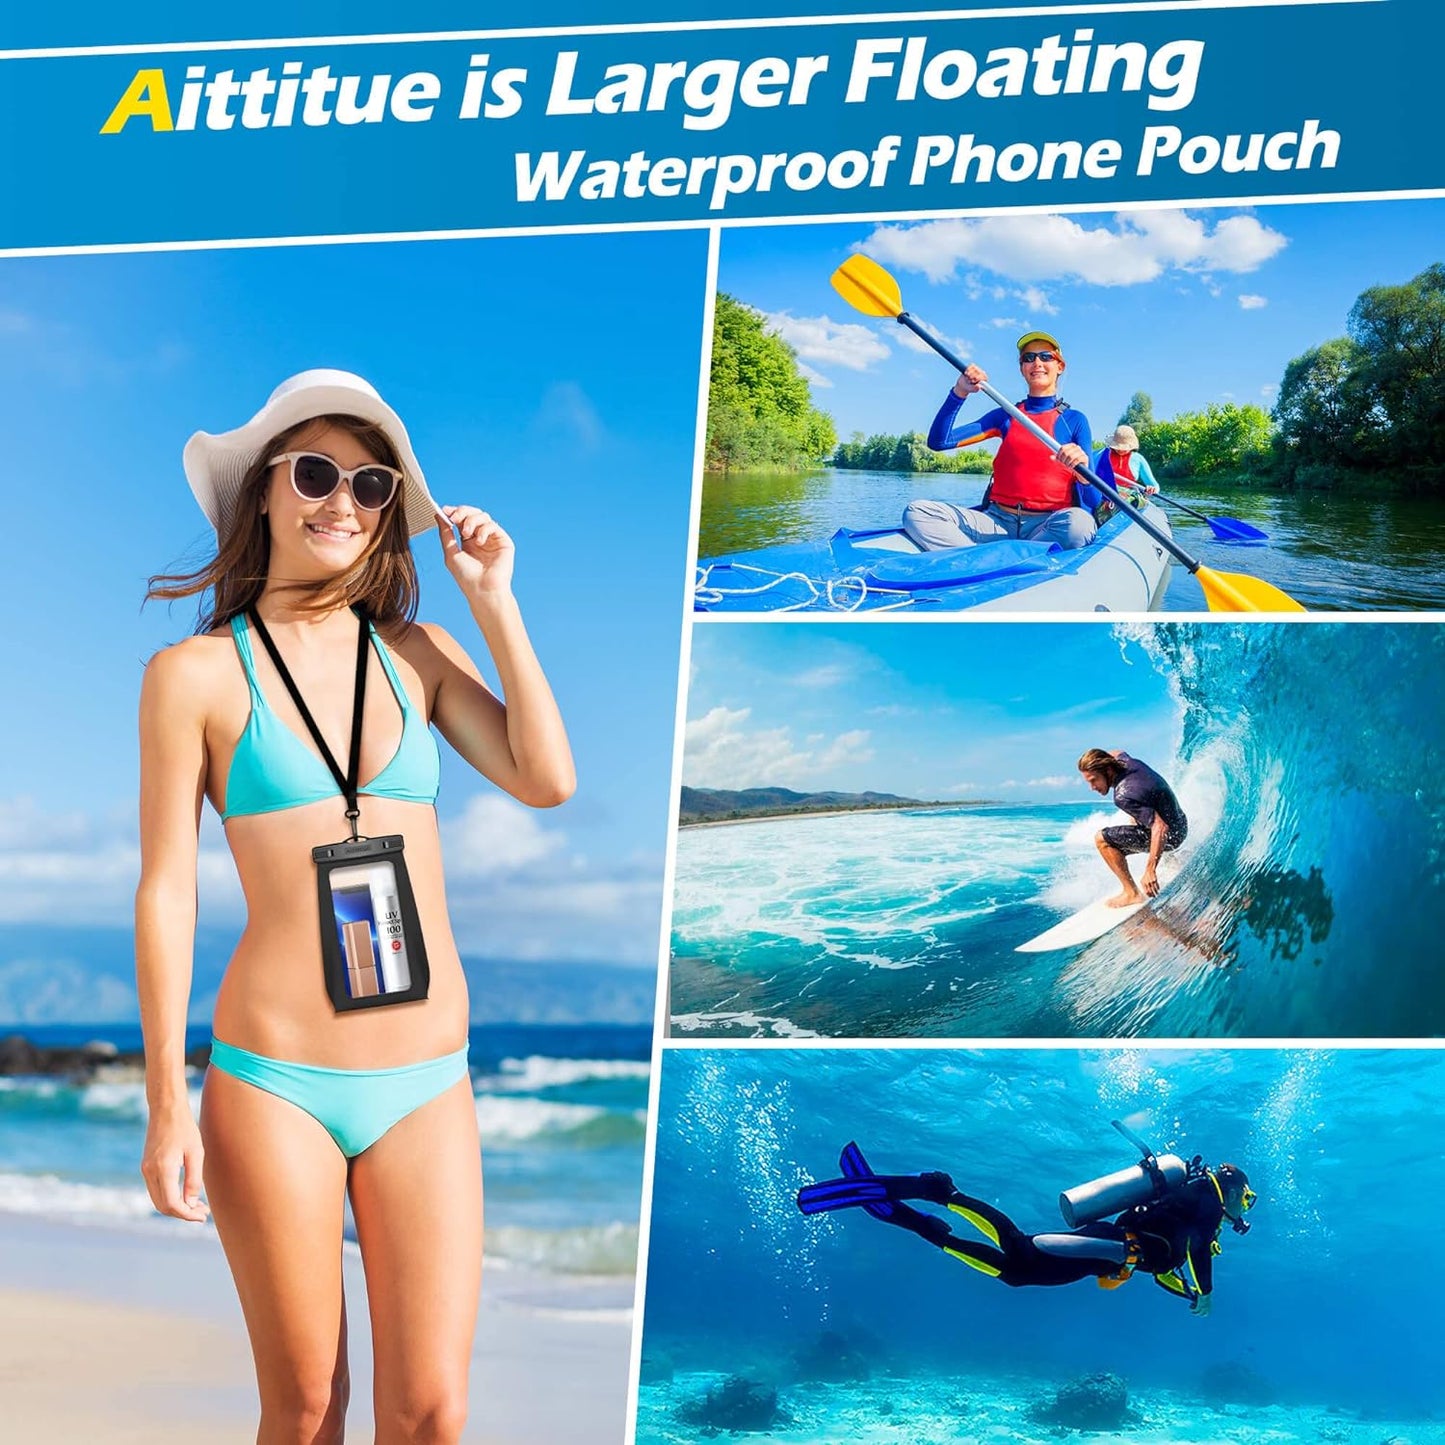 Aittitue Large Floating Waterproof Phone Pouch : 2 Pack Float Clear Cell Holder Protector with Lanyard